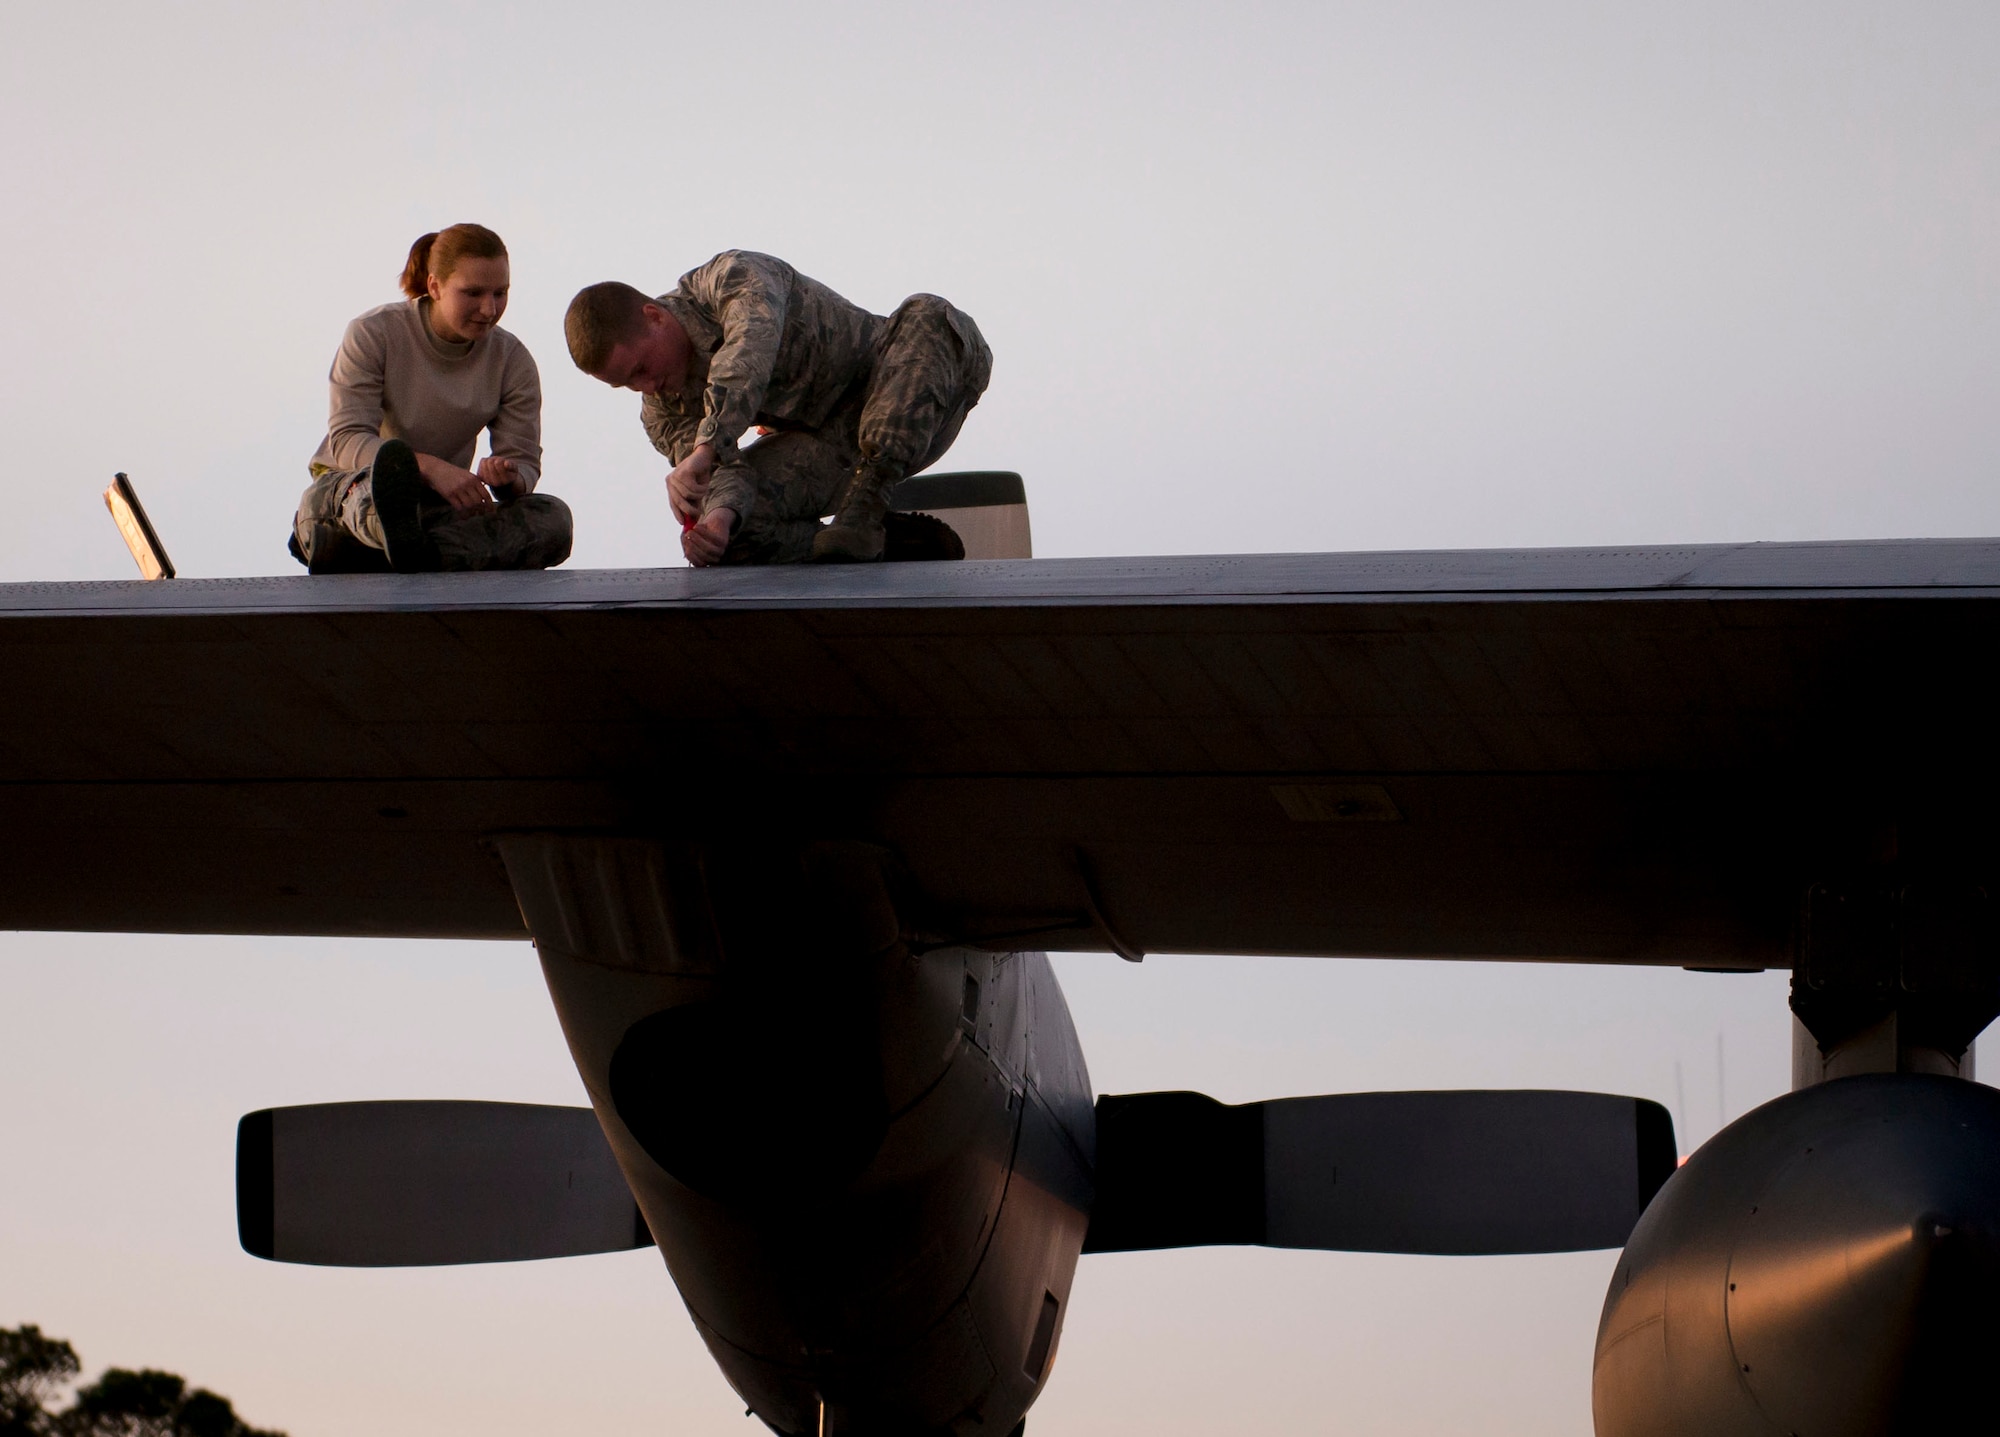 Airmen 1st Class Travis Venden and Kristen Markey, 15th Aircraft Maintenance Unit electrical and environmental technicians, perform electrical maintenance on the wing of a  MC-130 Talon II at Hurlburt Field, Fla., Dec. 8, 2014. The aircraft is specially modified to support unconventional warfare and special operations forces worldwide. (U.S. Air Force photo/Senior Airman Meagan K. Schutter)